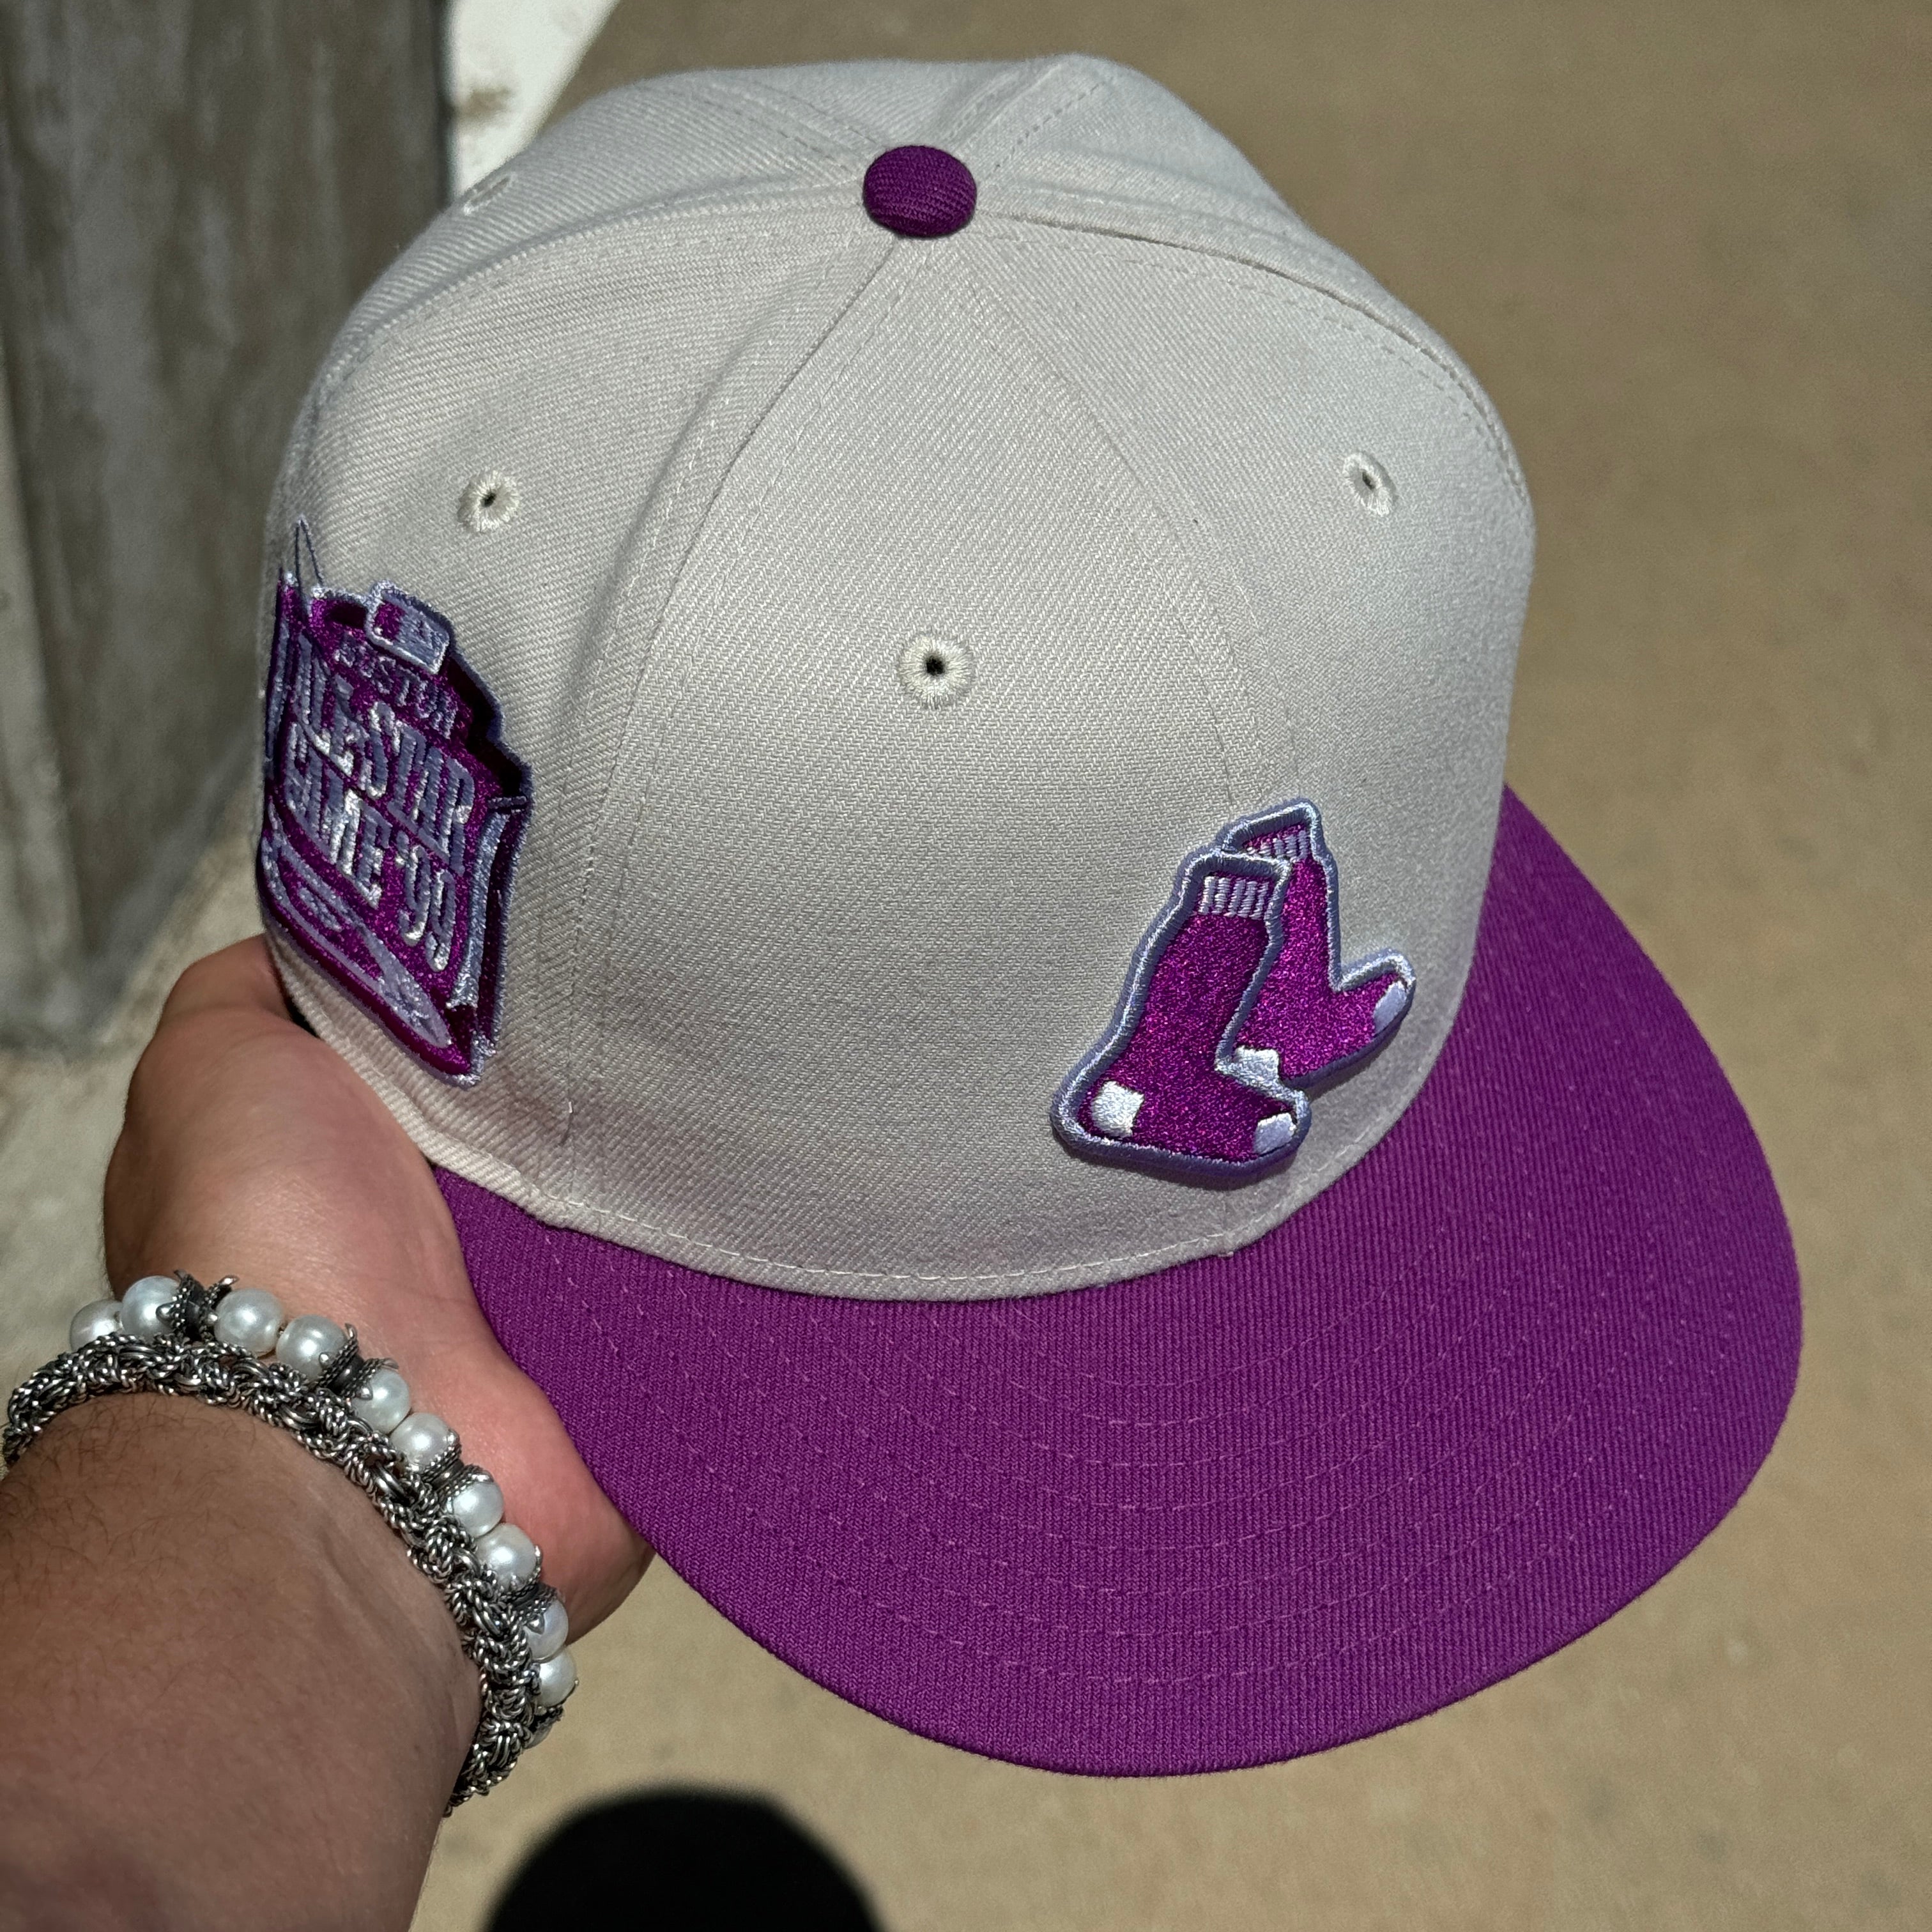 USED 7 Stone Boston Red Sox All Star Game 99 Purple 59FIFTY New Era Fitted Hat